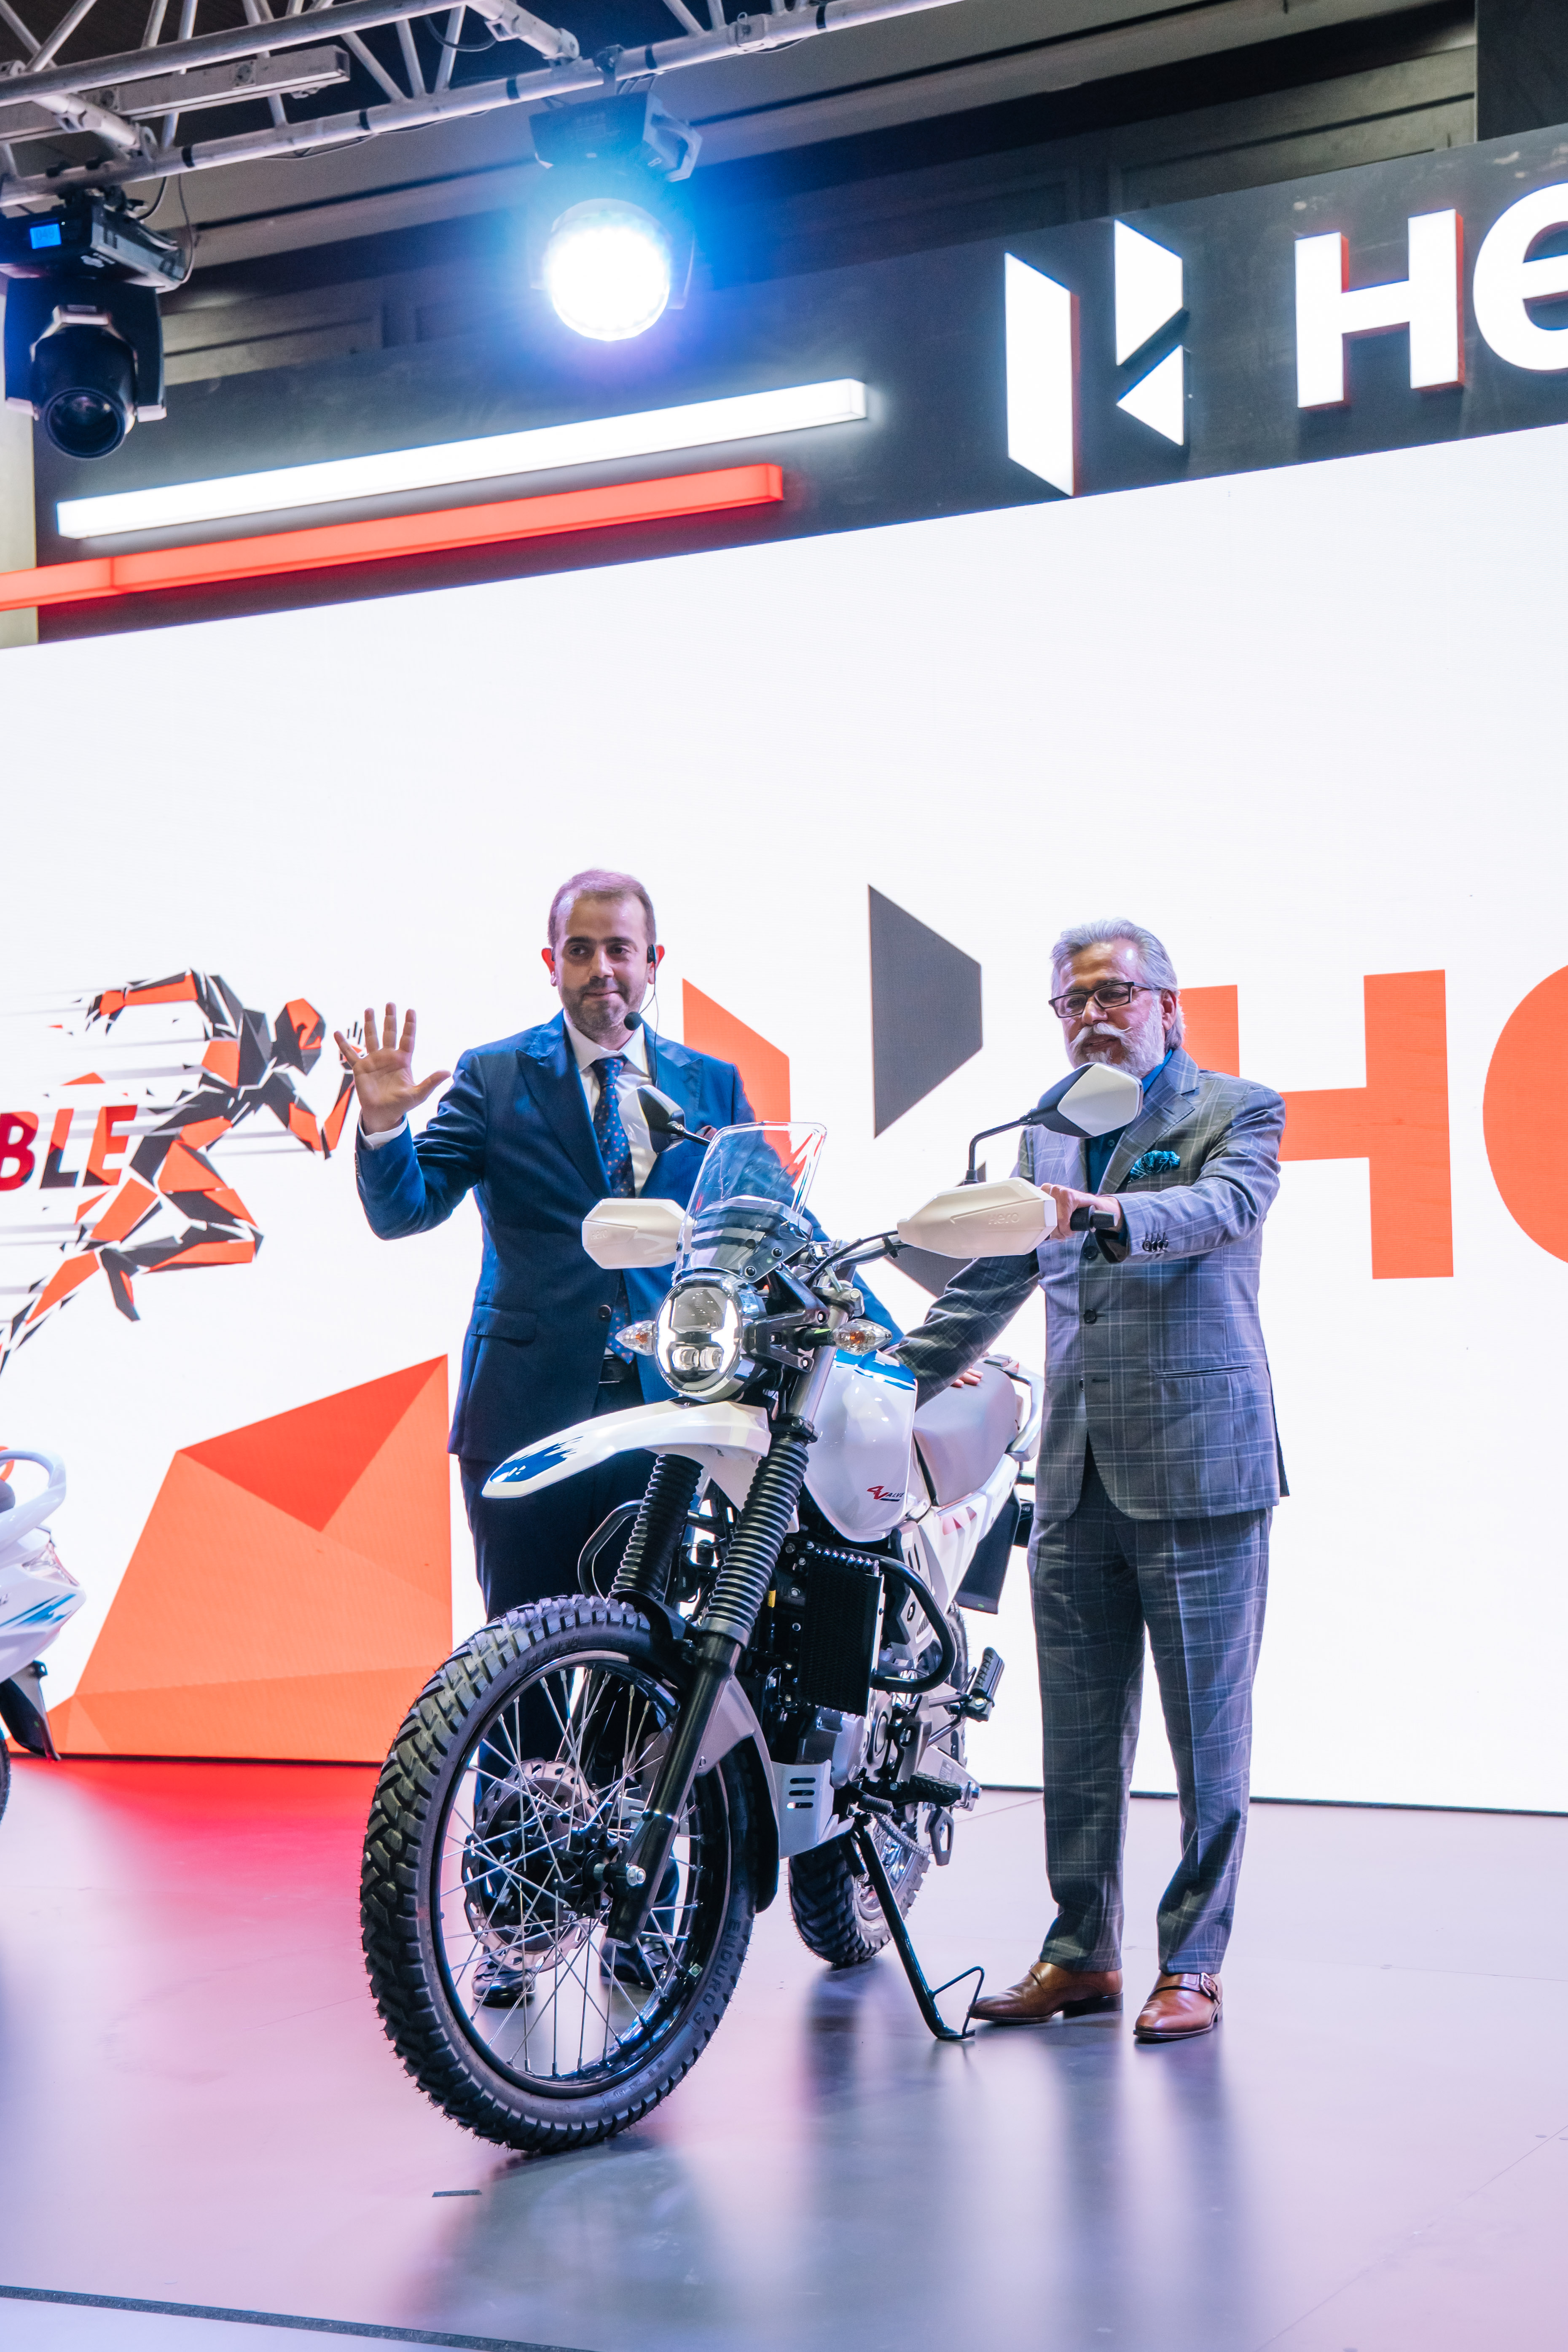 Dr. Pawan Munjal, Chairman and CEO, Hero MotoCorp introduced three new products – the Xpulse 200 4V motorcycle and Dash 110 & Dash 125 scooters in Turkiye today